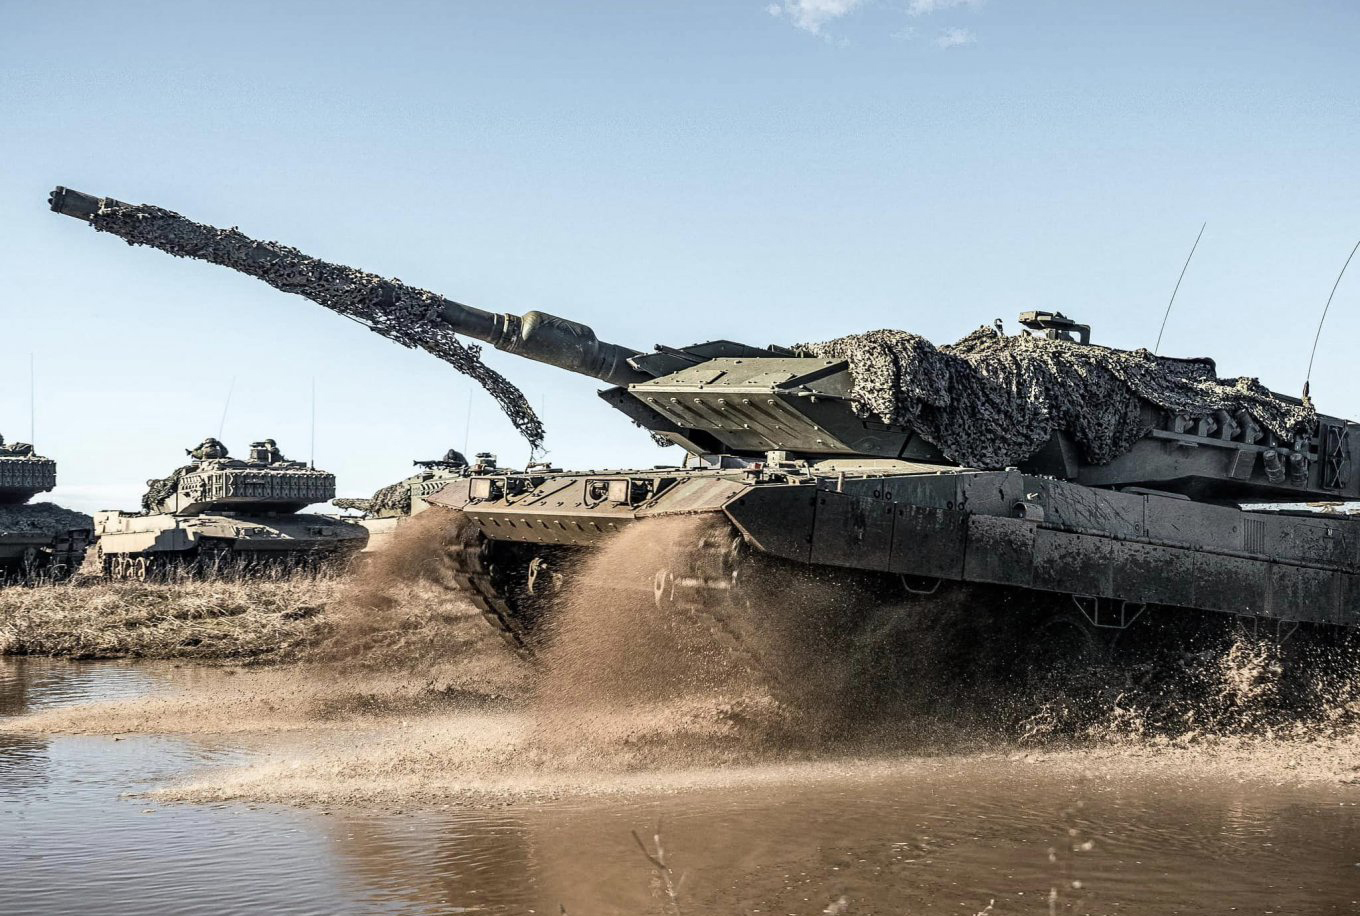 Leopard 2 / Defense Express / U.S. Dismantles its Status as Global Security Guardian: Why Josep Borrell's Speech is Important and What's Coming Next